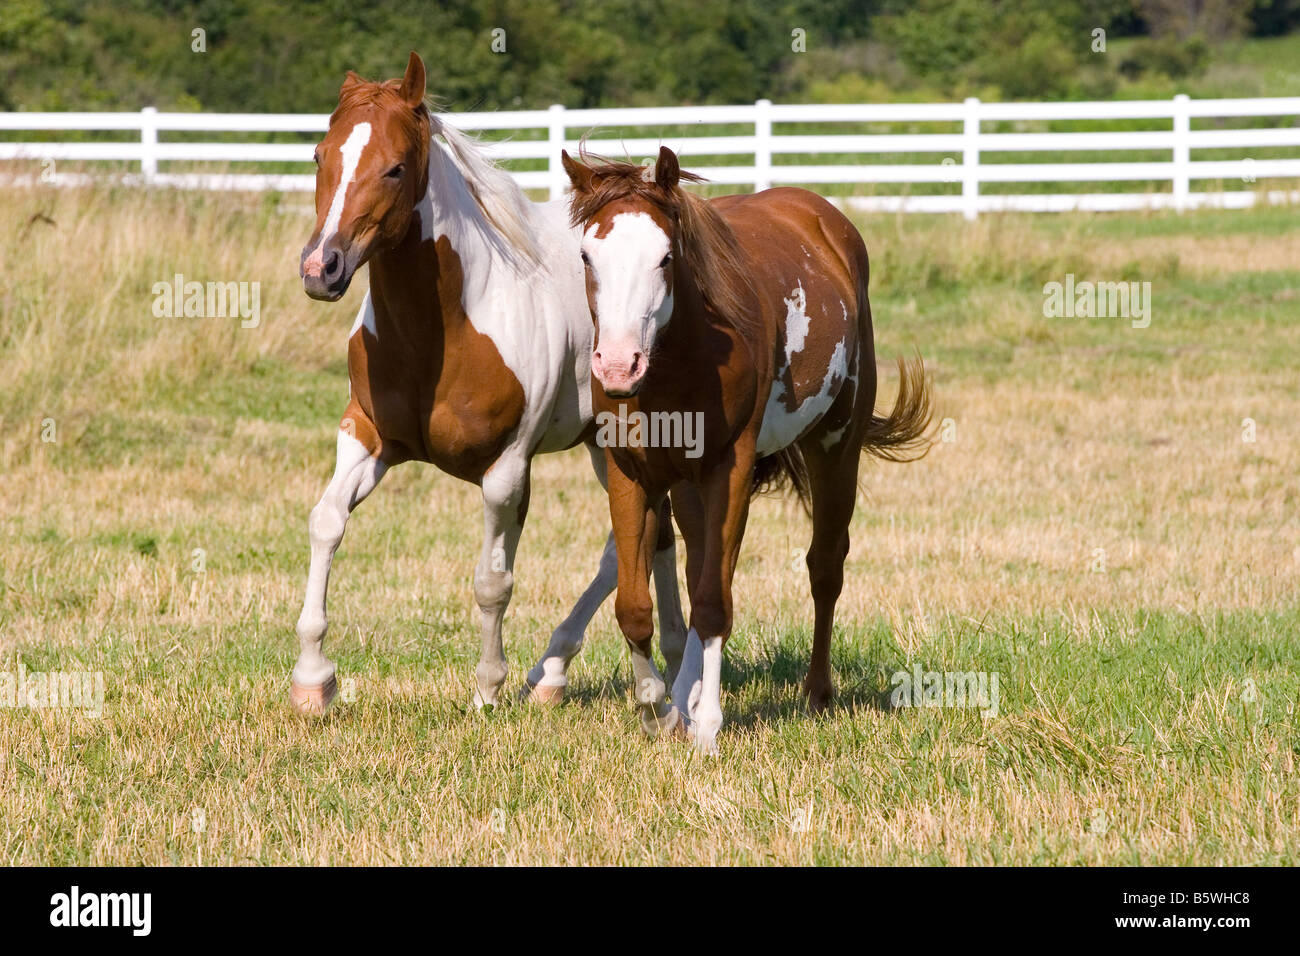 Paint horses walking together side by side in a field on a sunny day Stock Photo